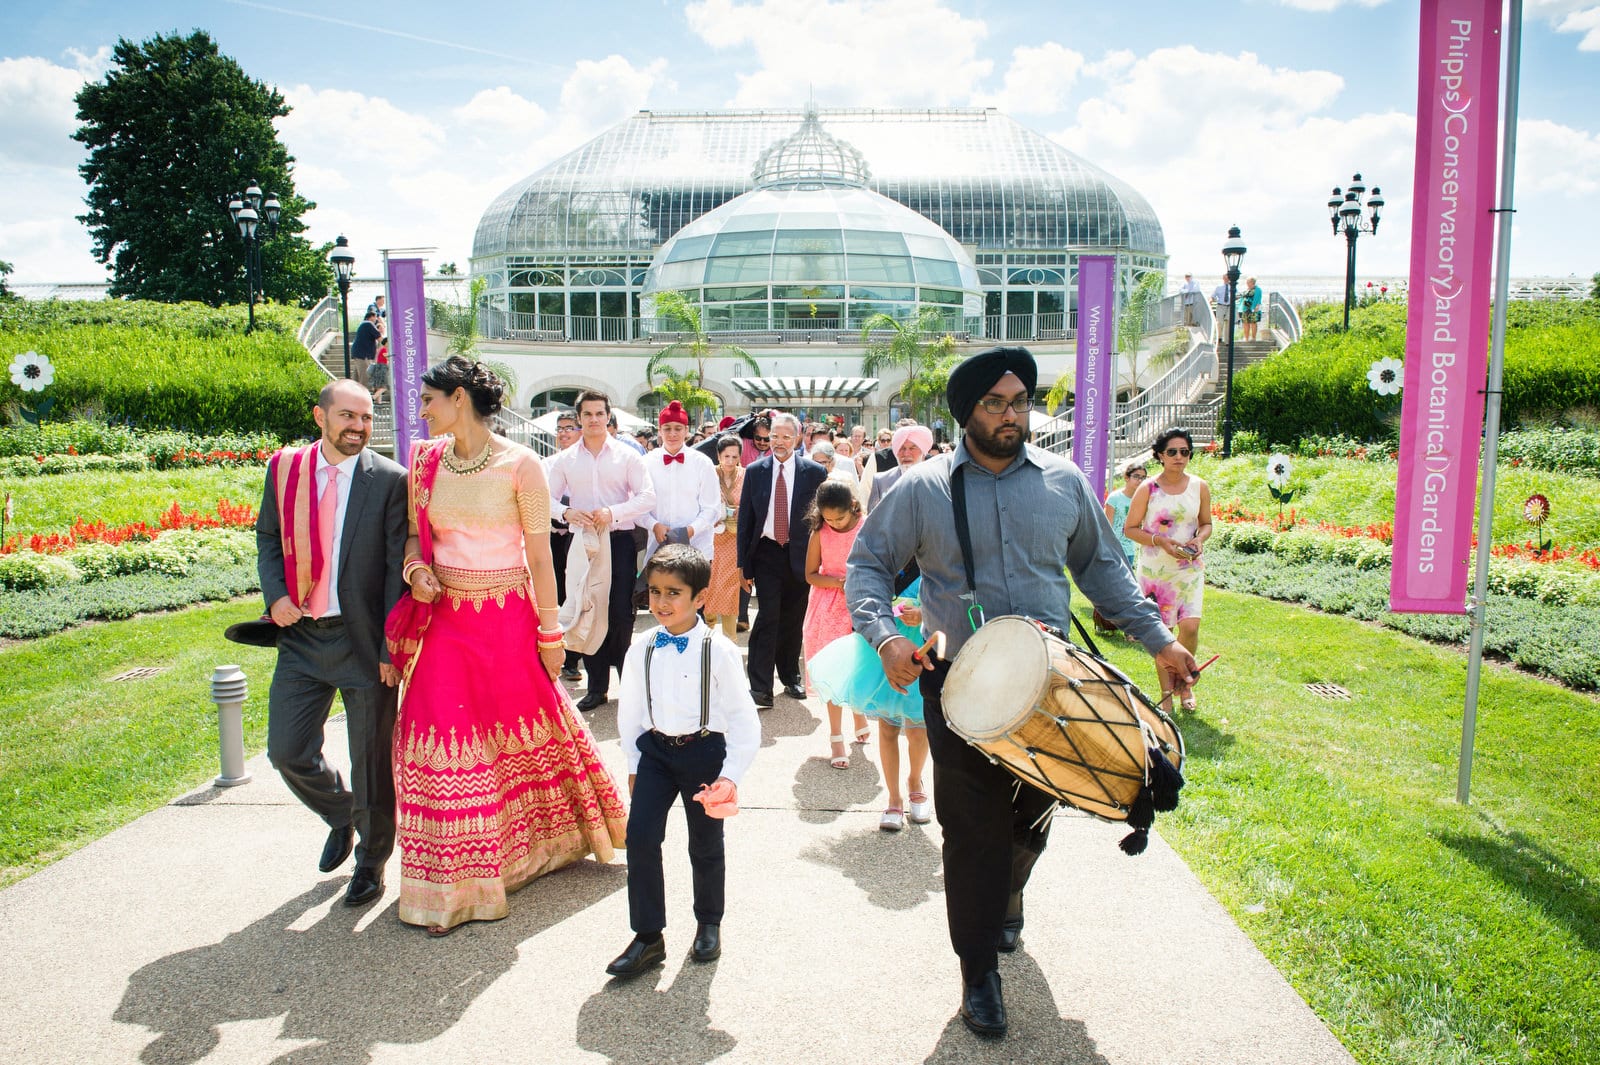 A drummer leads a bride and groom from the entrance at Phipps Conservatory after their Renaissance Phipps South Asian Wedding.